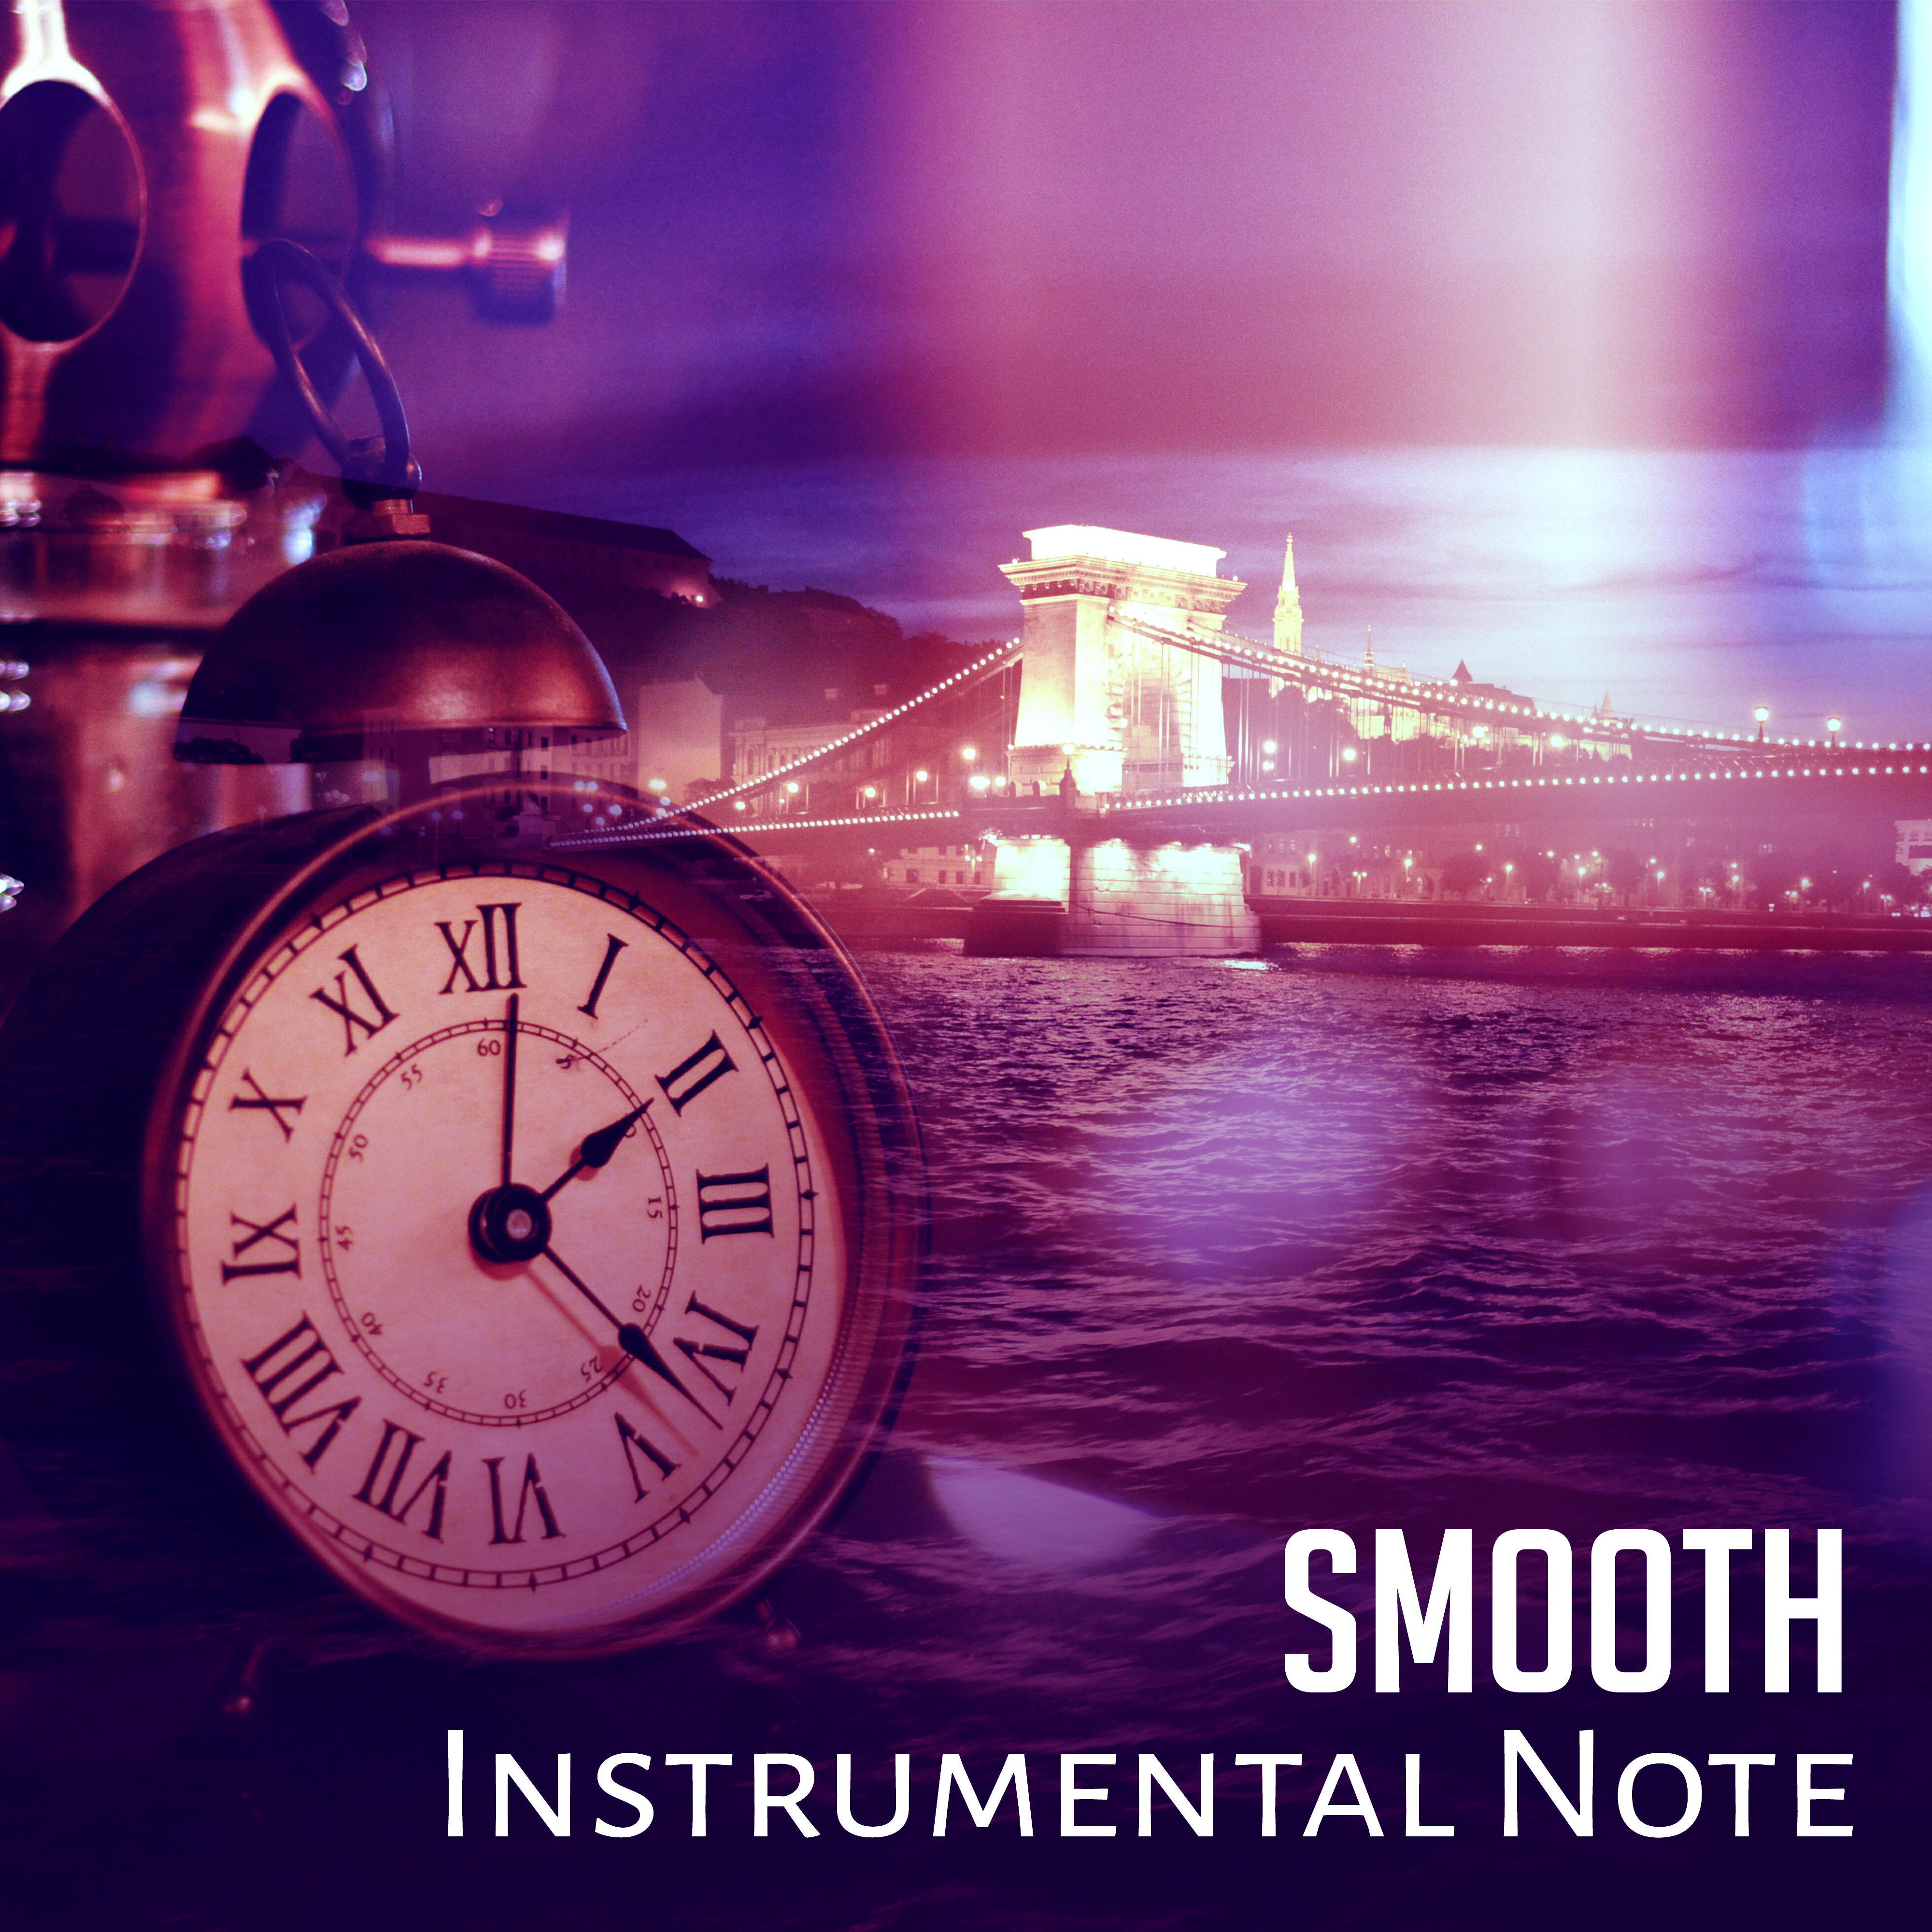 Smooth Instrumental Note  Chilled  Relaxing Jazz Music, Sounds to Rest, Night Jazz Session